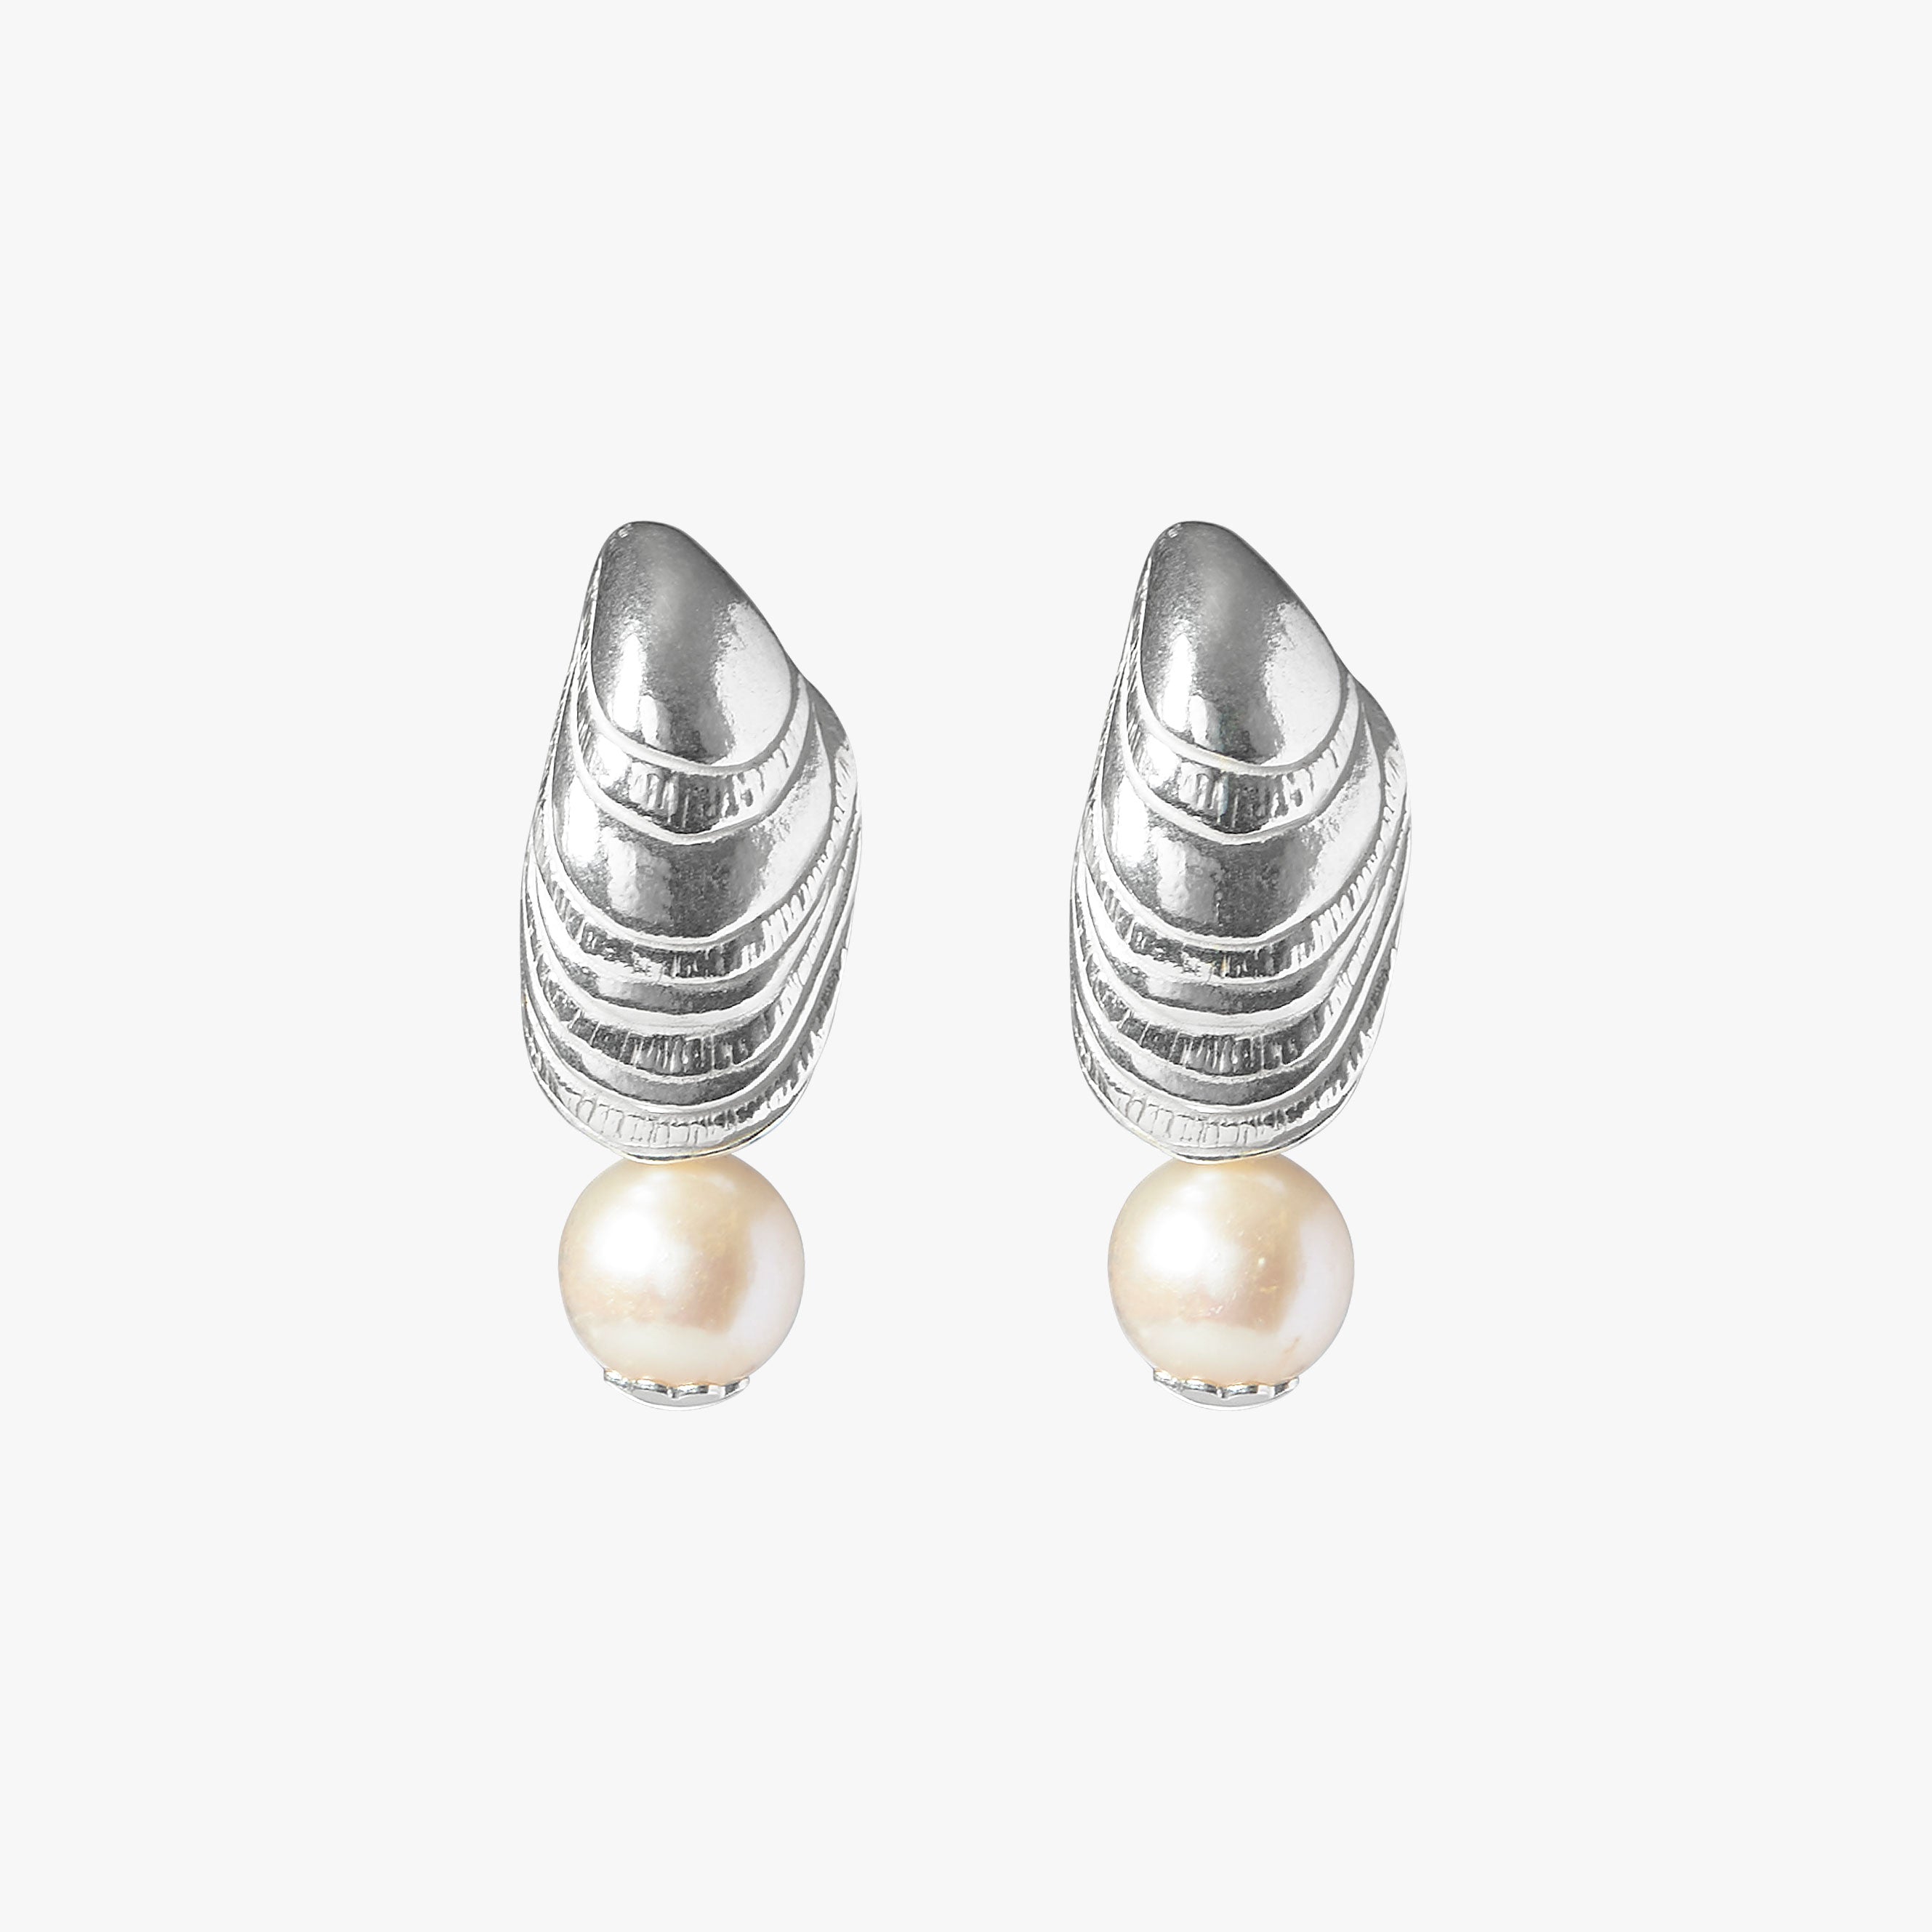 Ilot Flamant Silver Round - Oceano Pearls